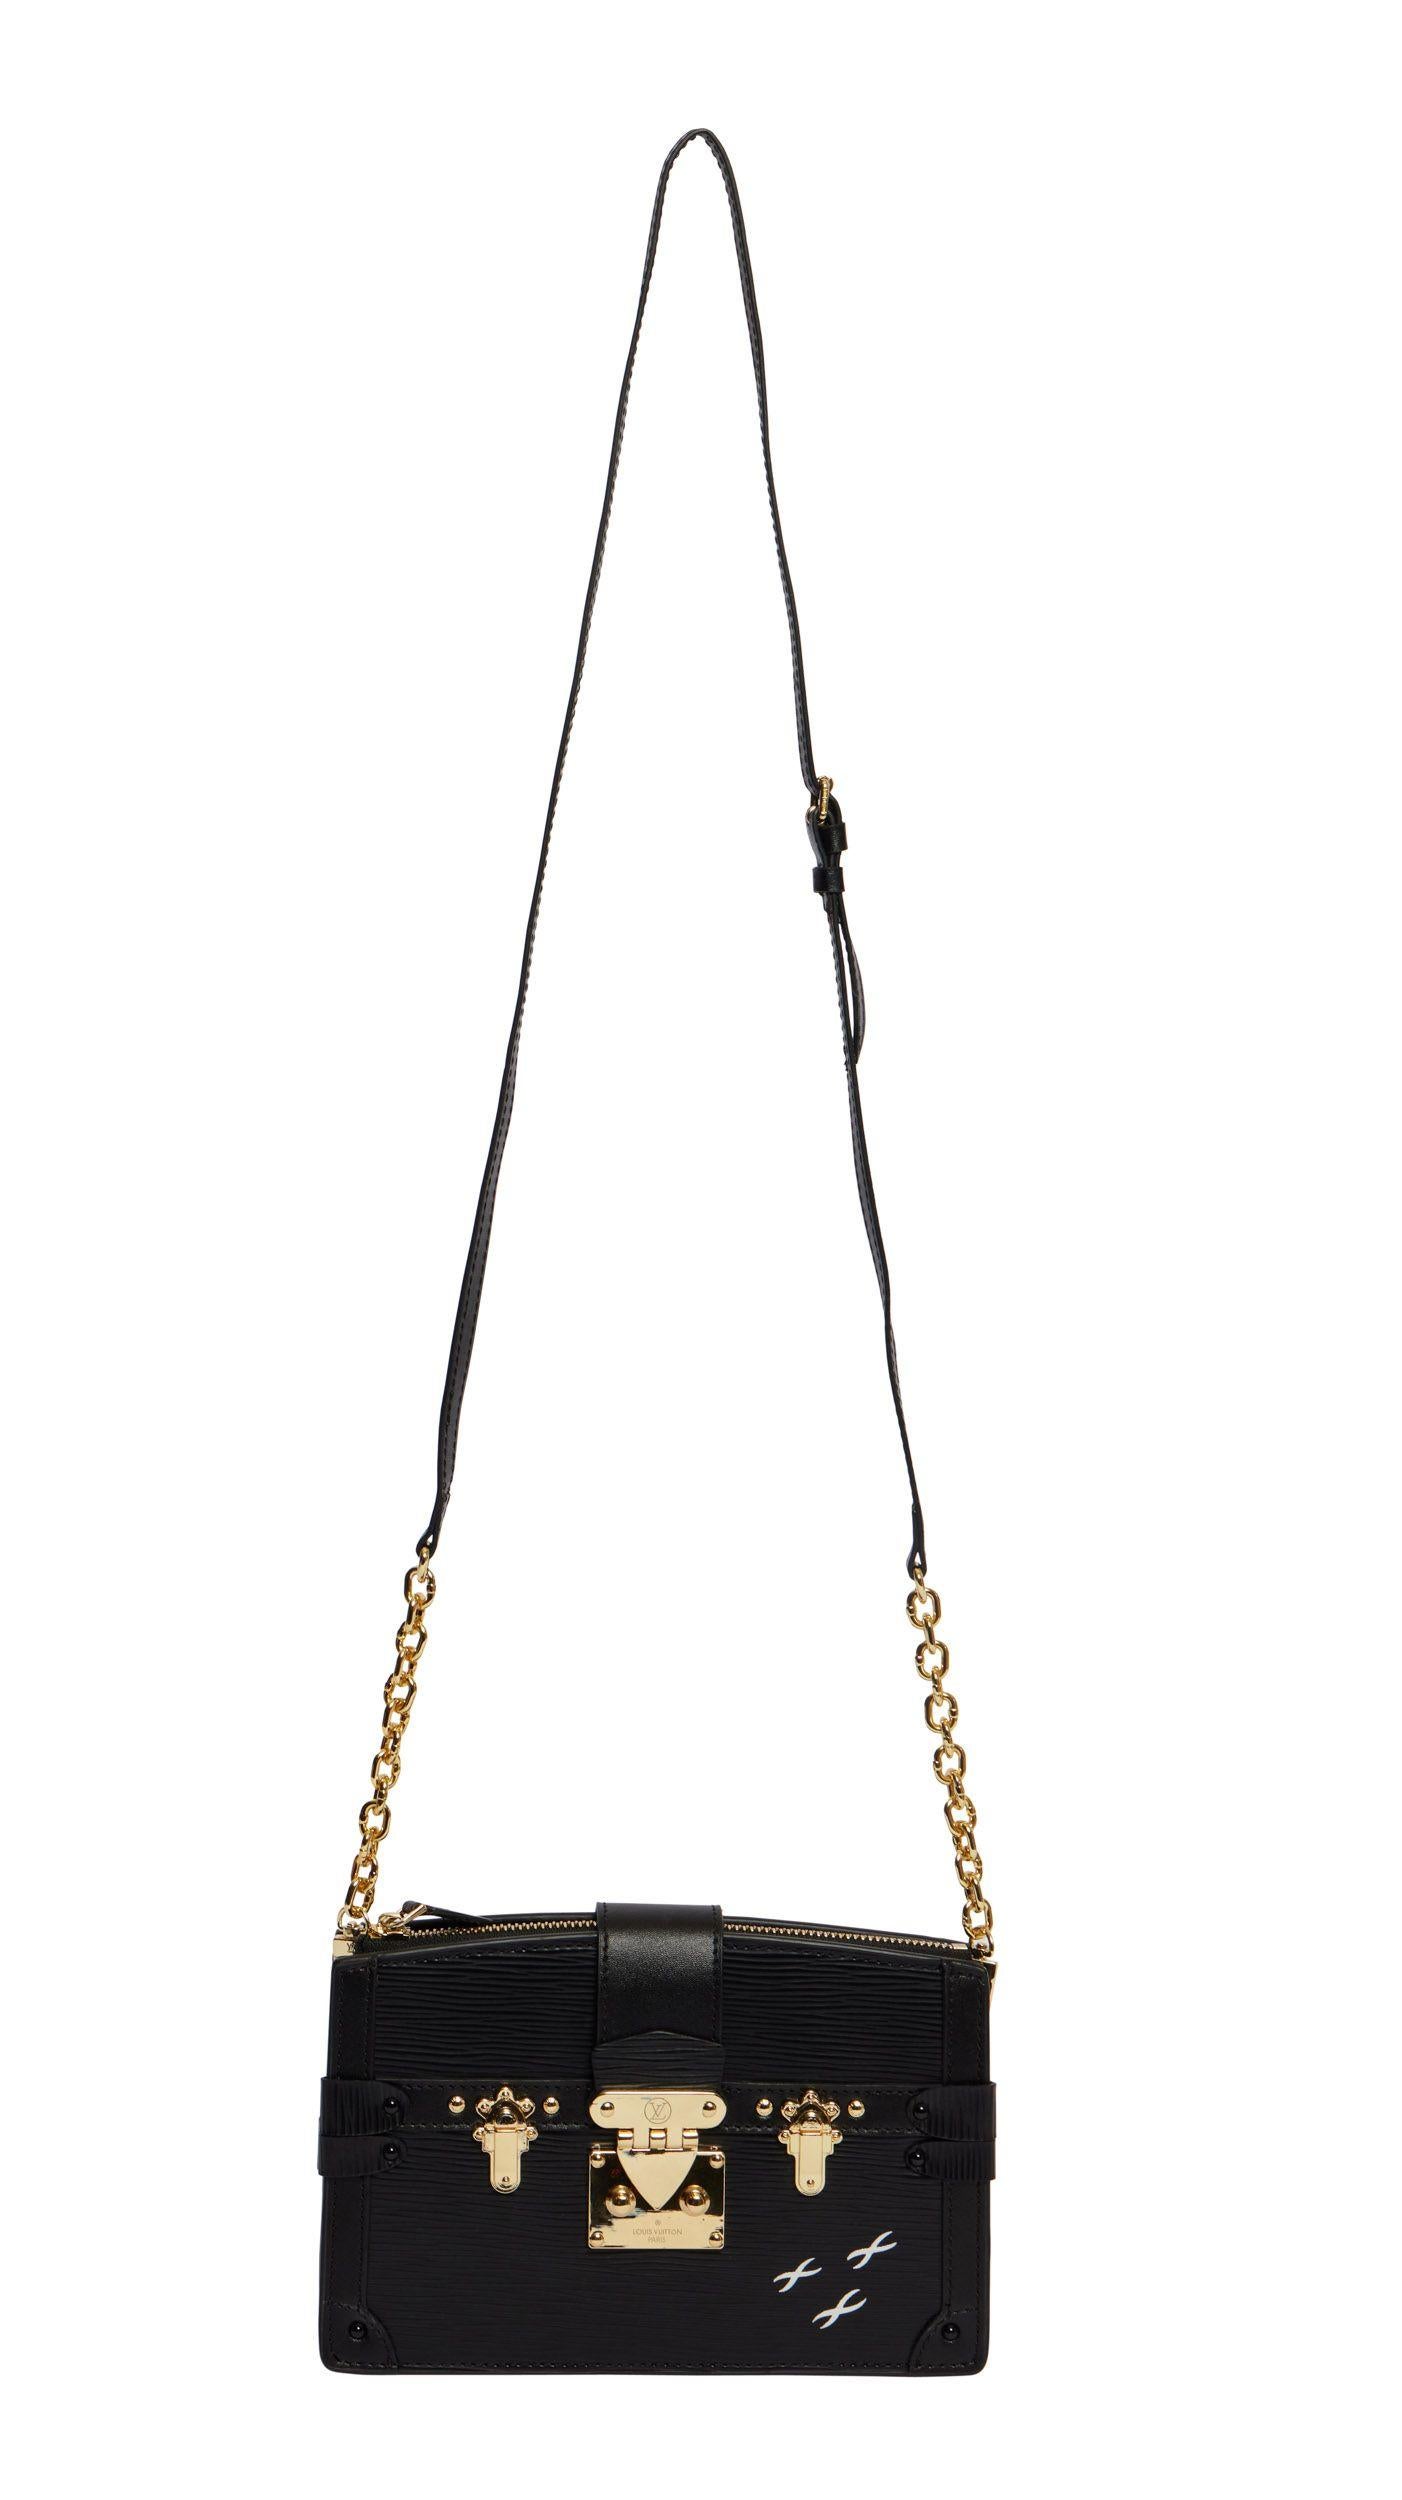 Louis Vuitton limited edition black epi petit malle trunk. The piece can be worn as crossbody with a detachable and adjustable shoulder strap (23